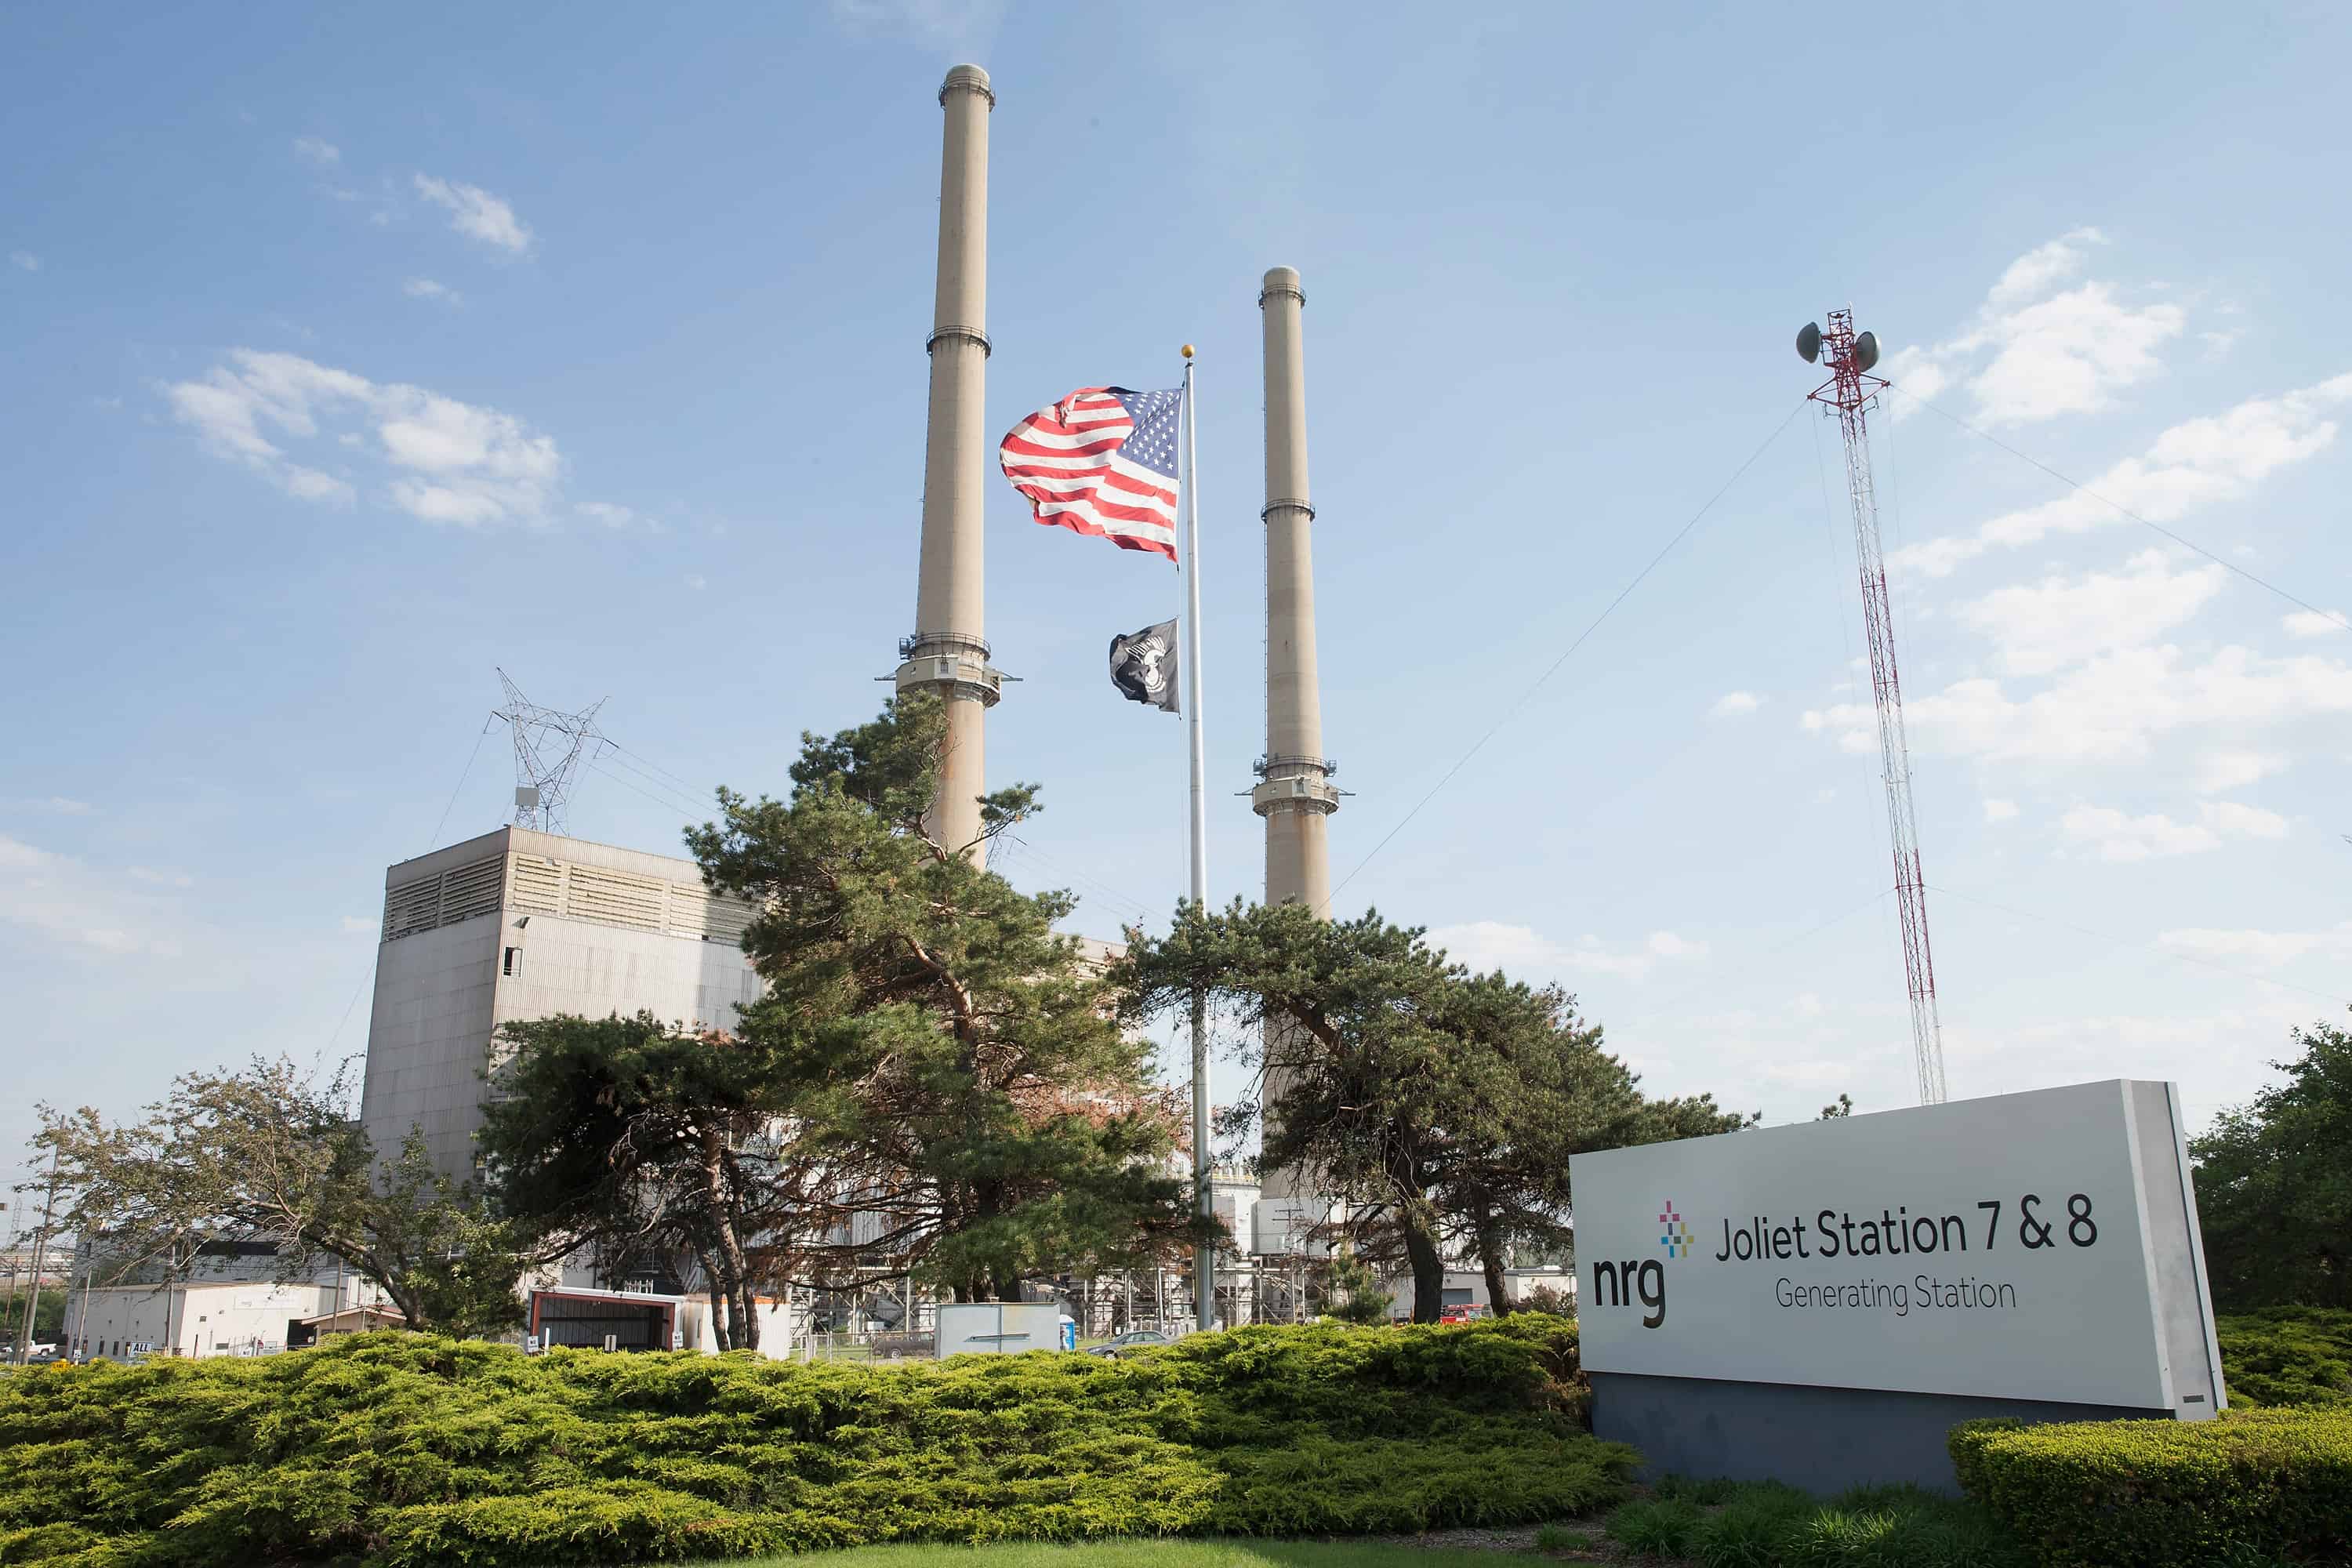 A U.S. flag hangs in front of NRG Energy's Joliet Station power plant.